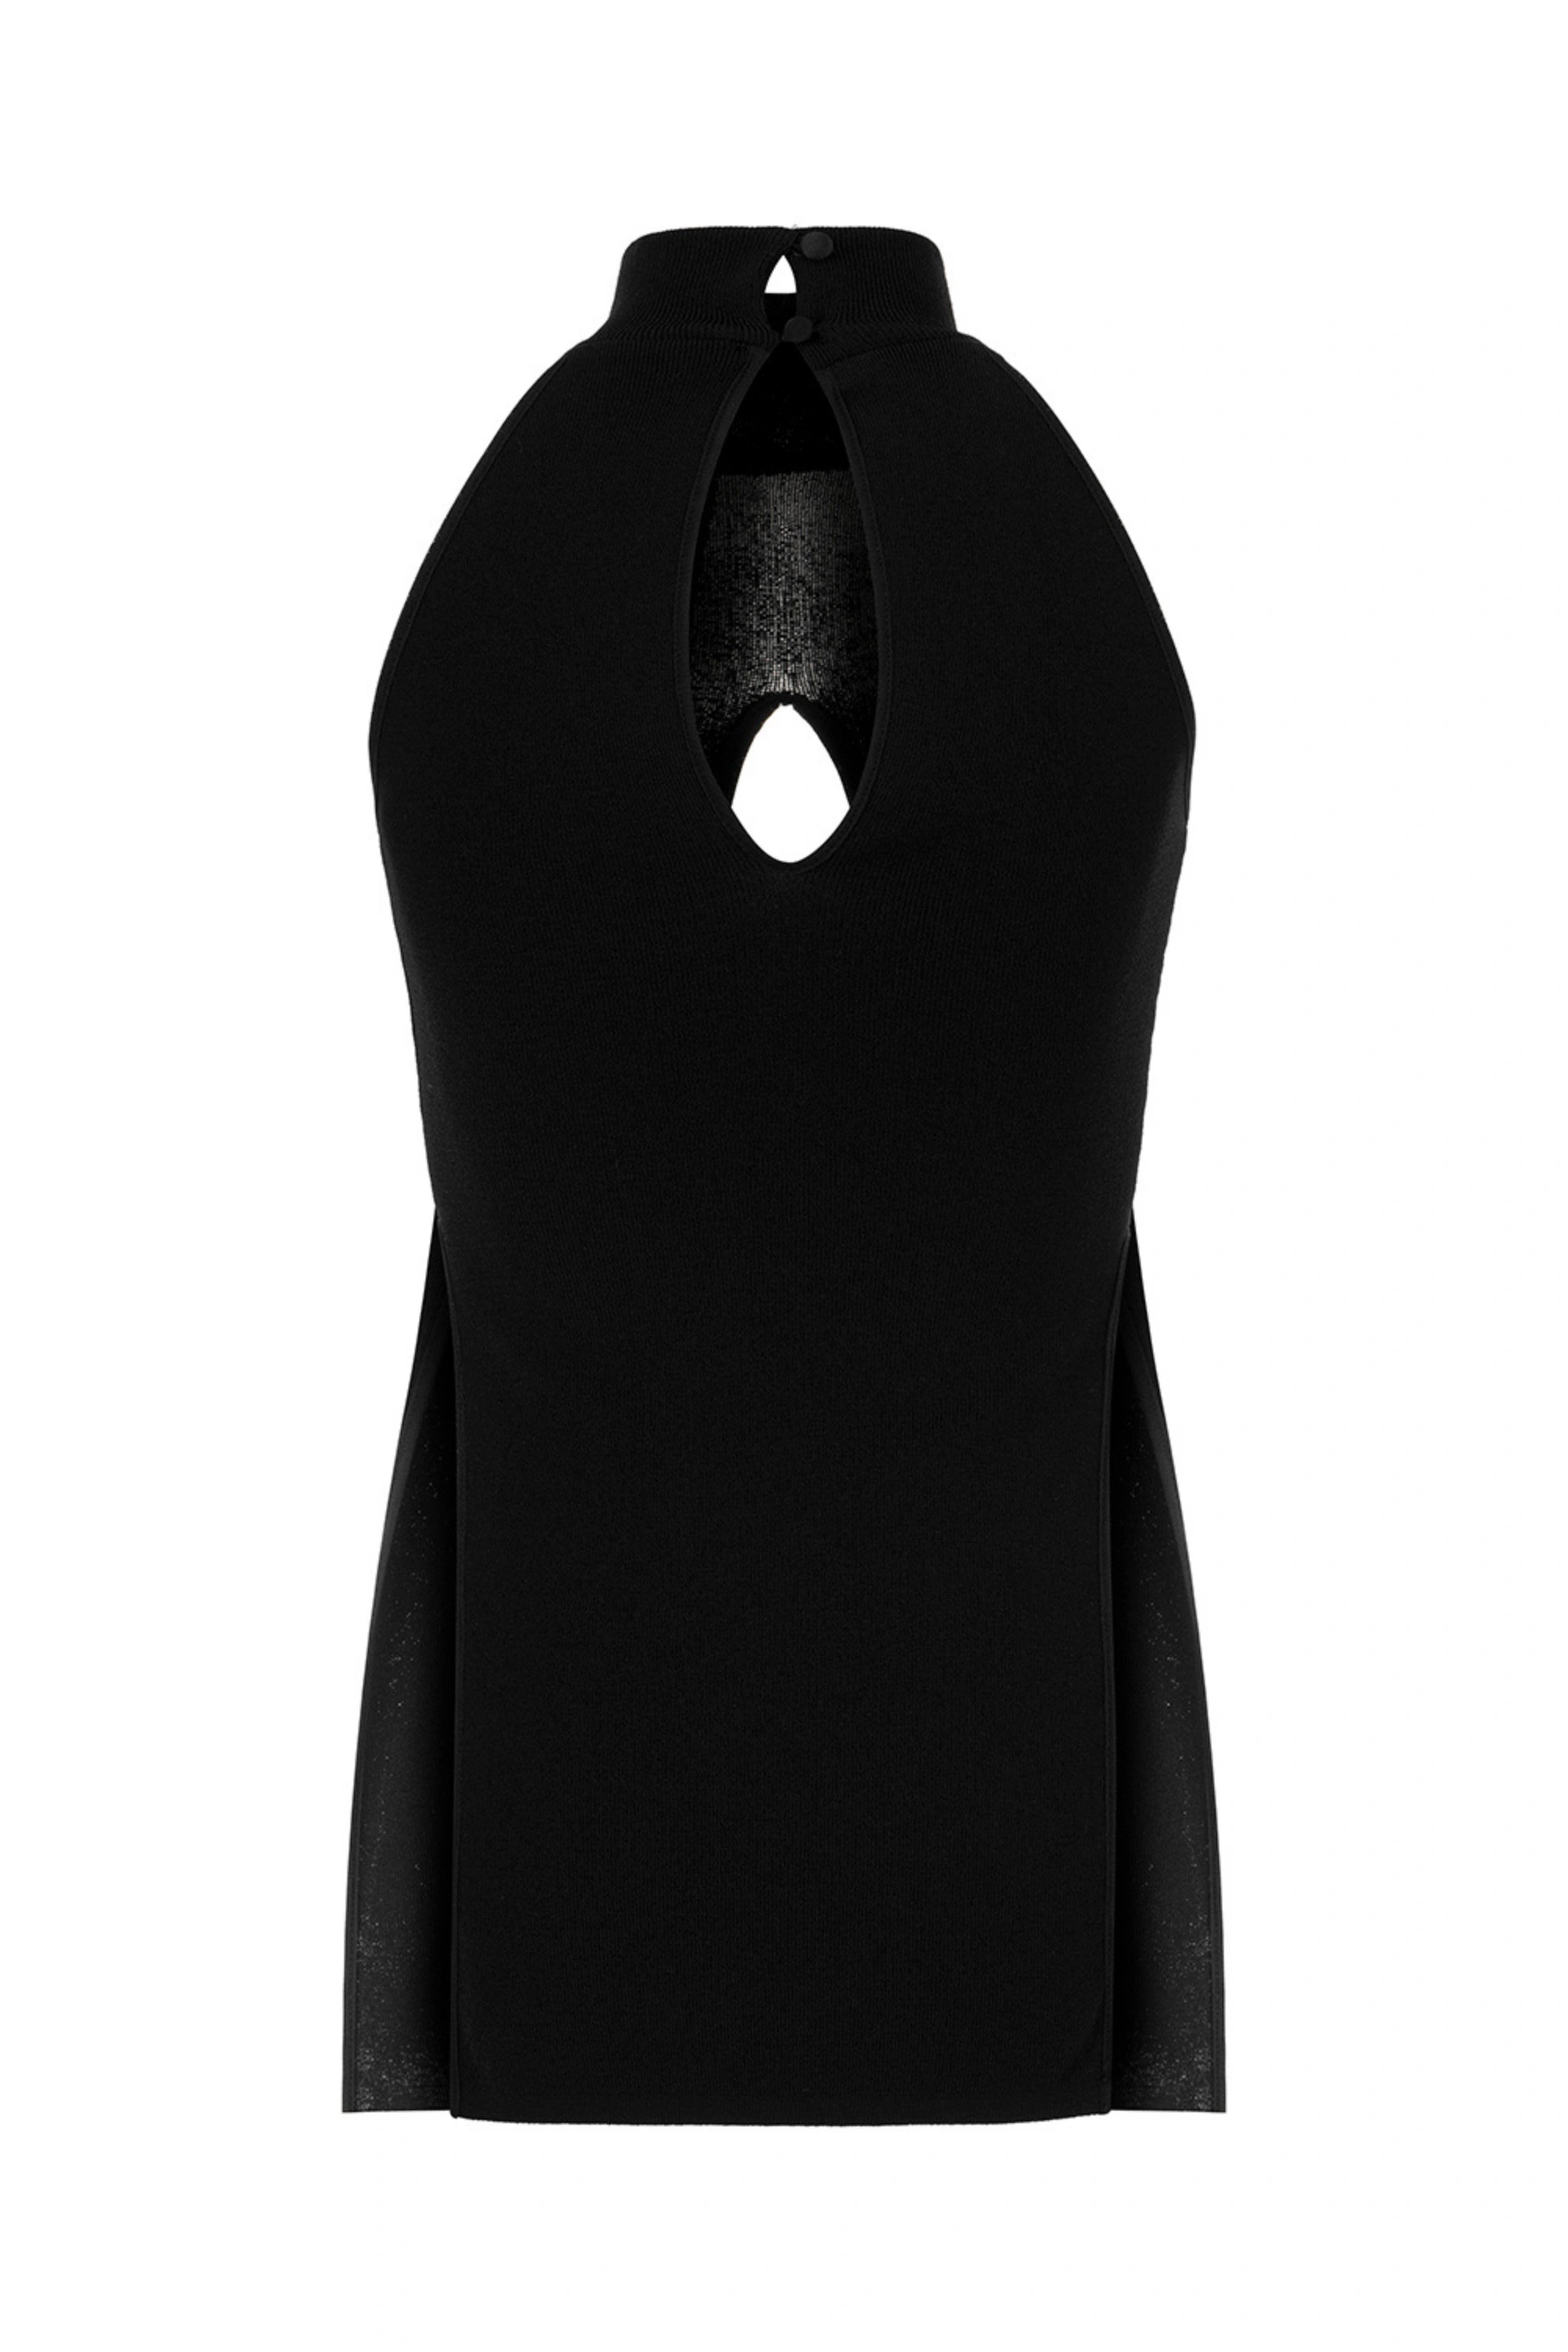 Turtleneck Cut-Out Detailed Top